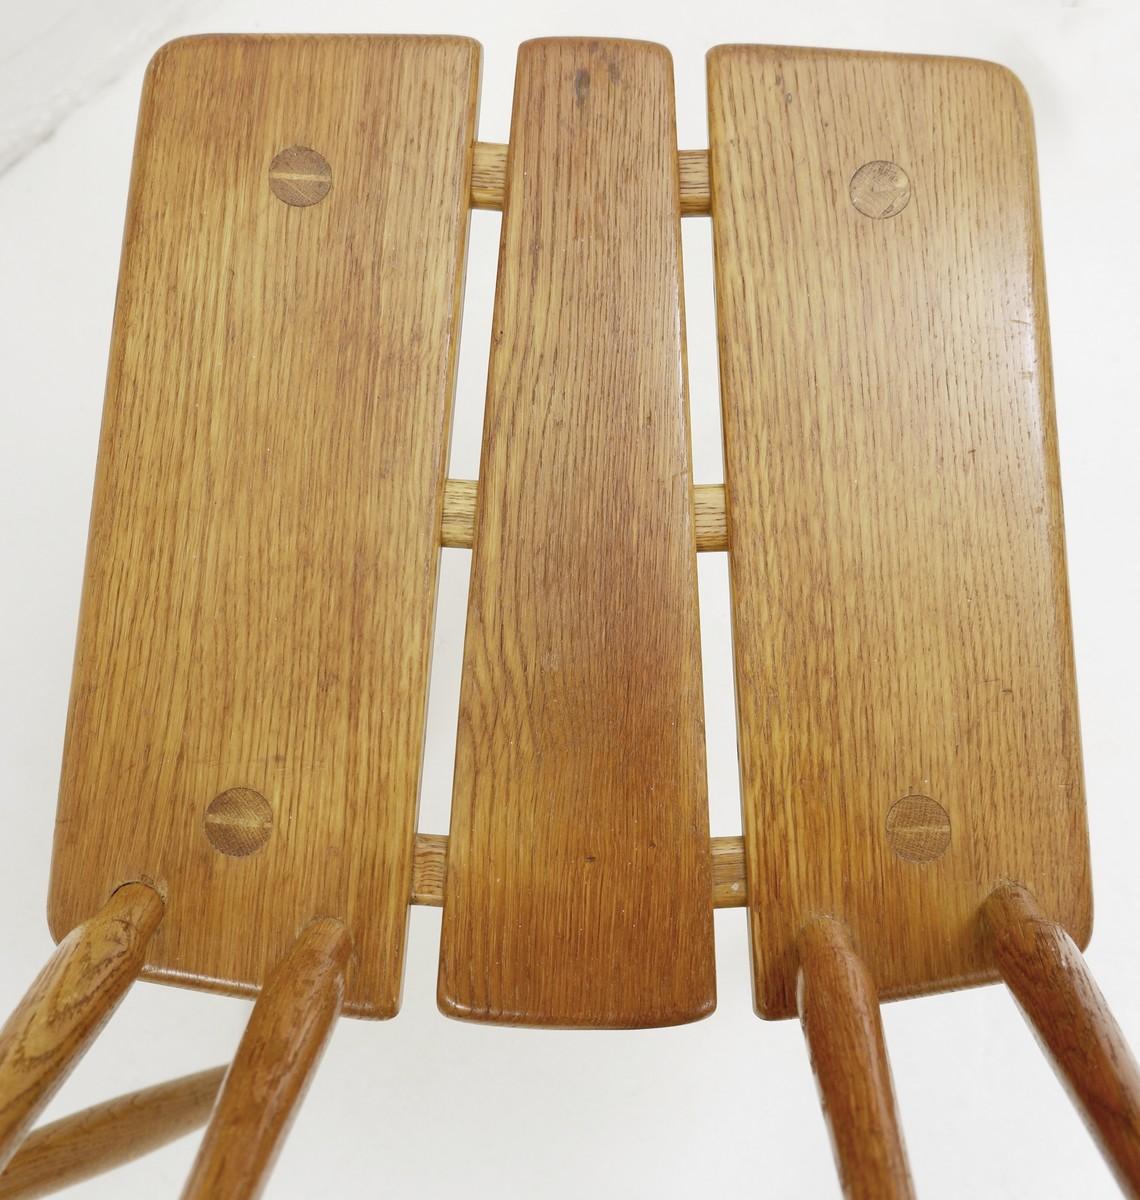 Wood Carl-Gustav Boulogner Chairs in Oak, Produced by Ab Bröderna Wigells Stolfabrik For Sale